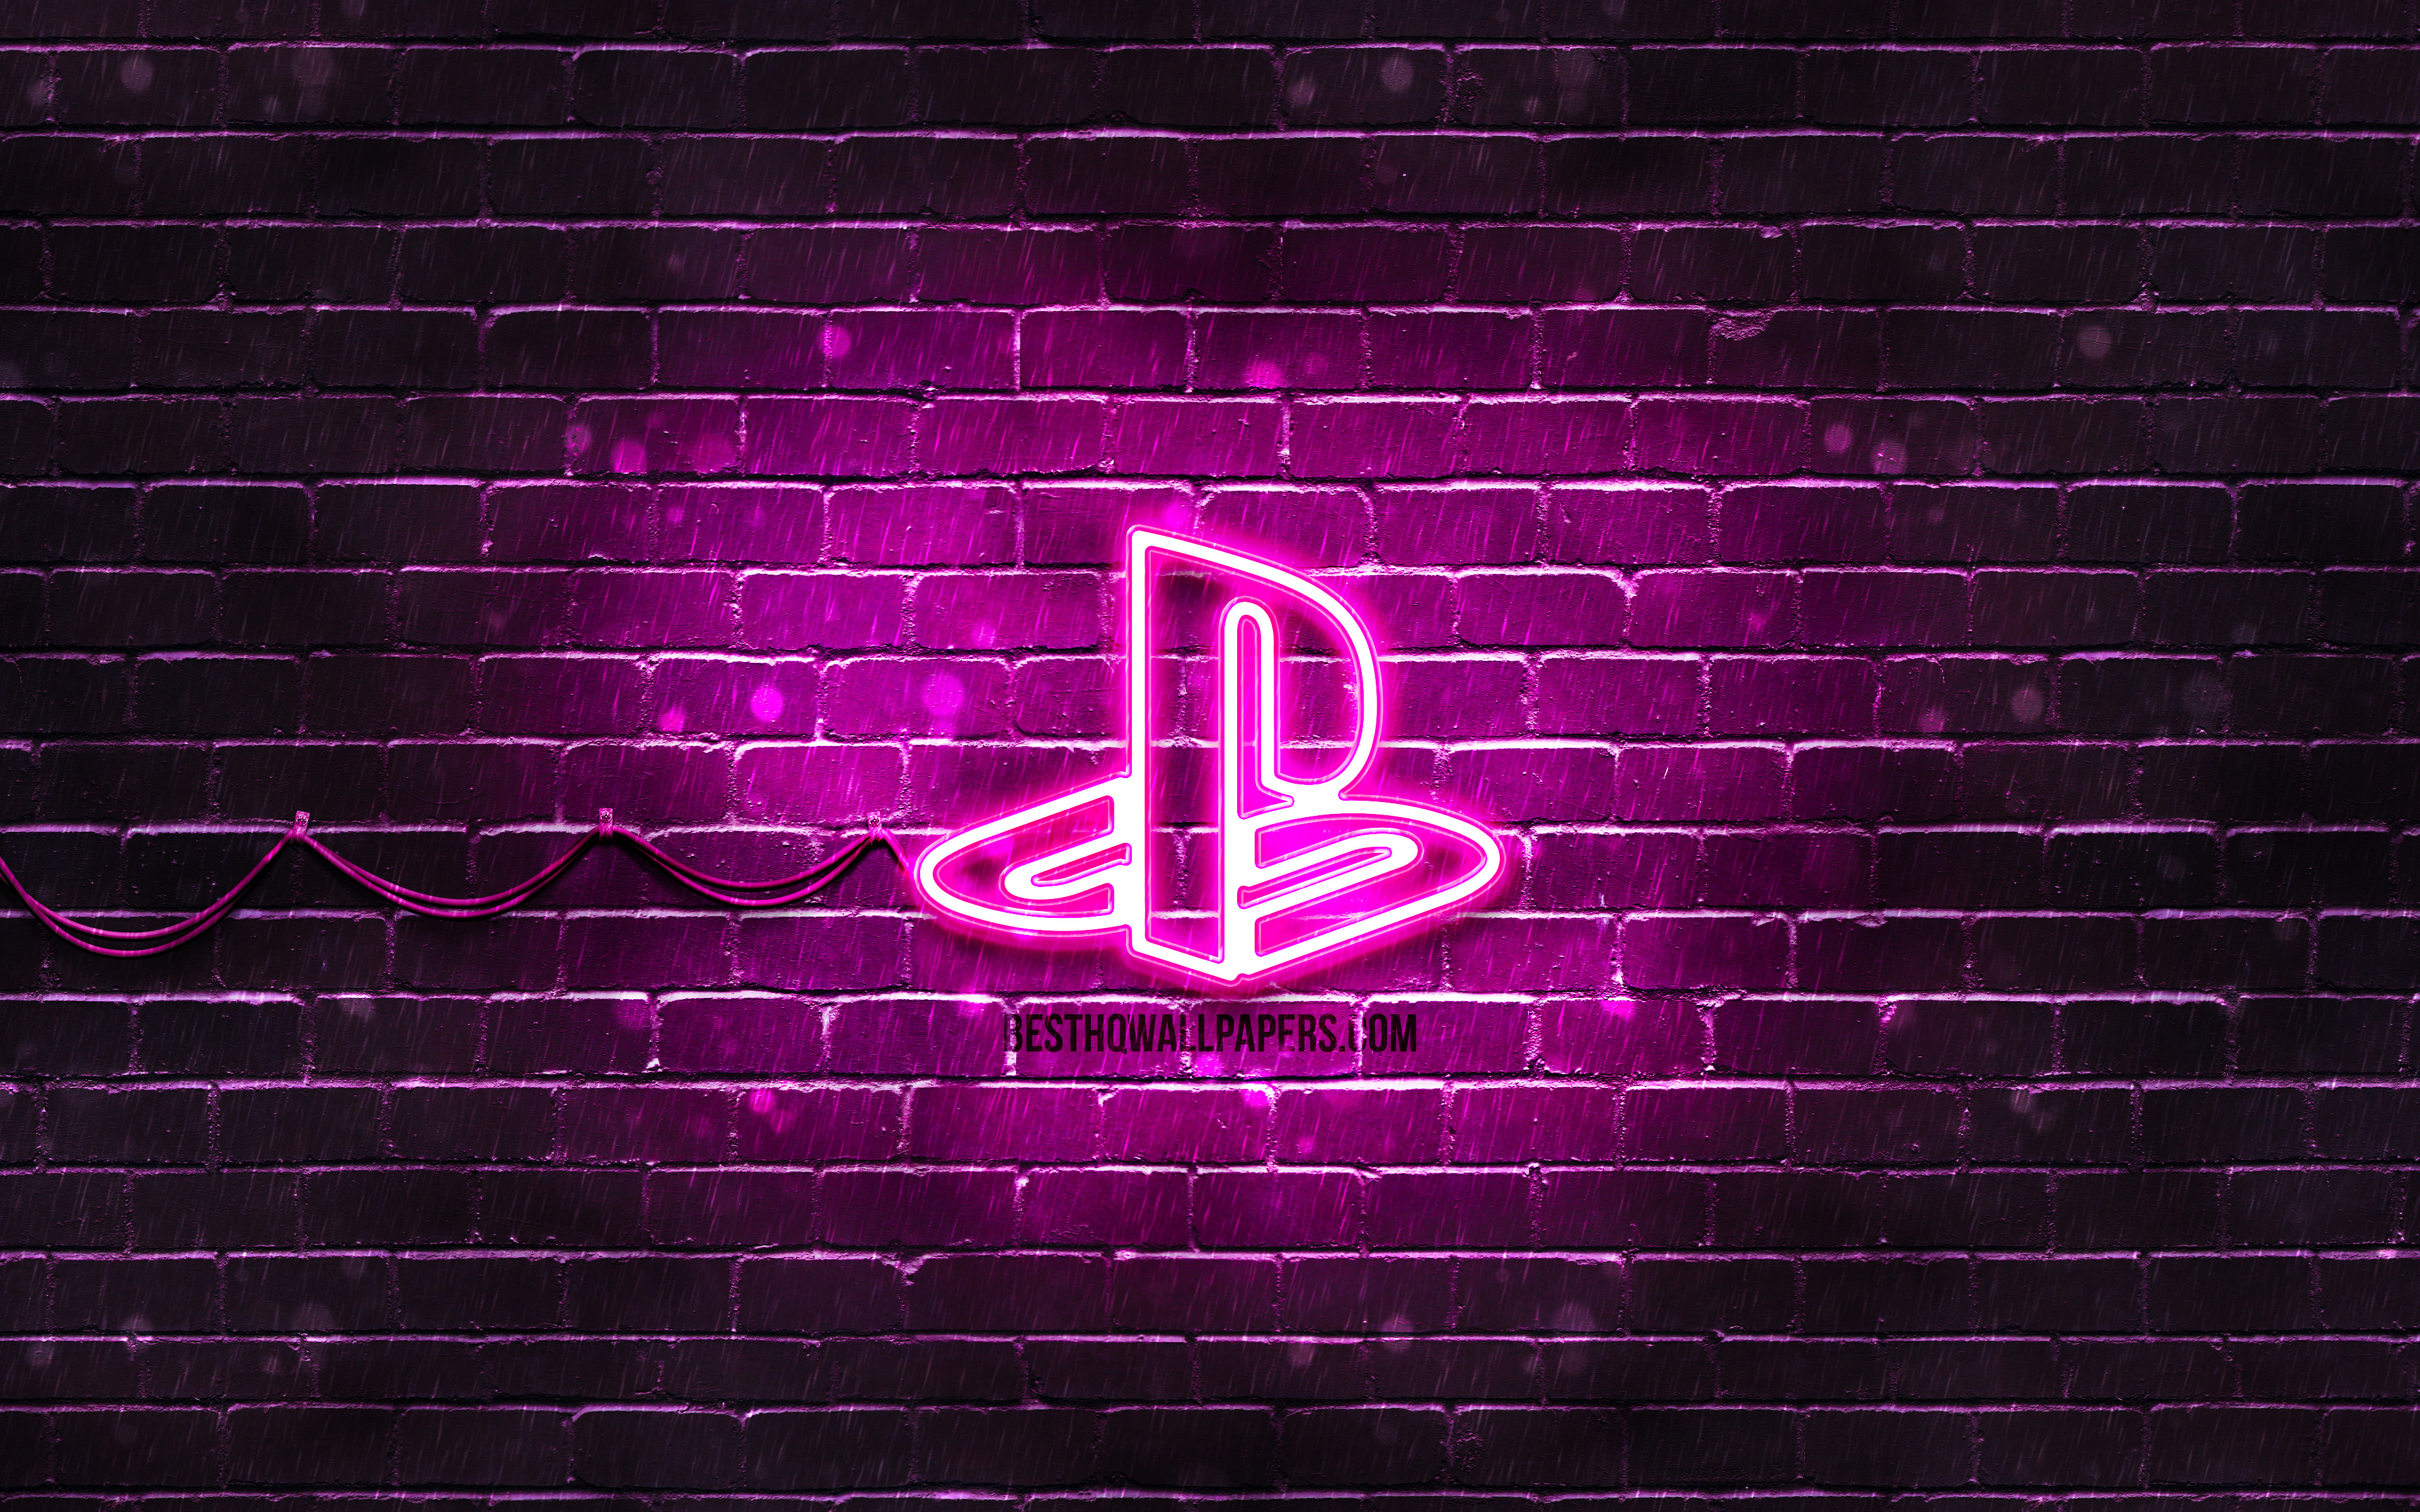 Download wallpaper PlayStation purple logo, 4k, purple brickwall, PlayStation logo, brands, PlayStation neon logo, PlayStation for desktop with resolution 3840x2400. High Quality HD picture wallpaper